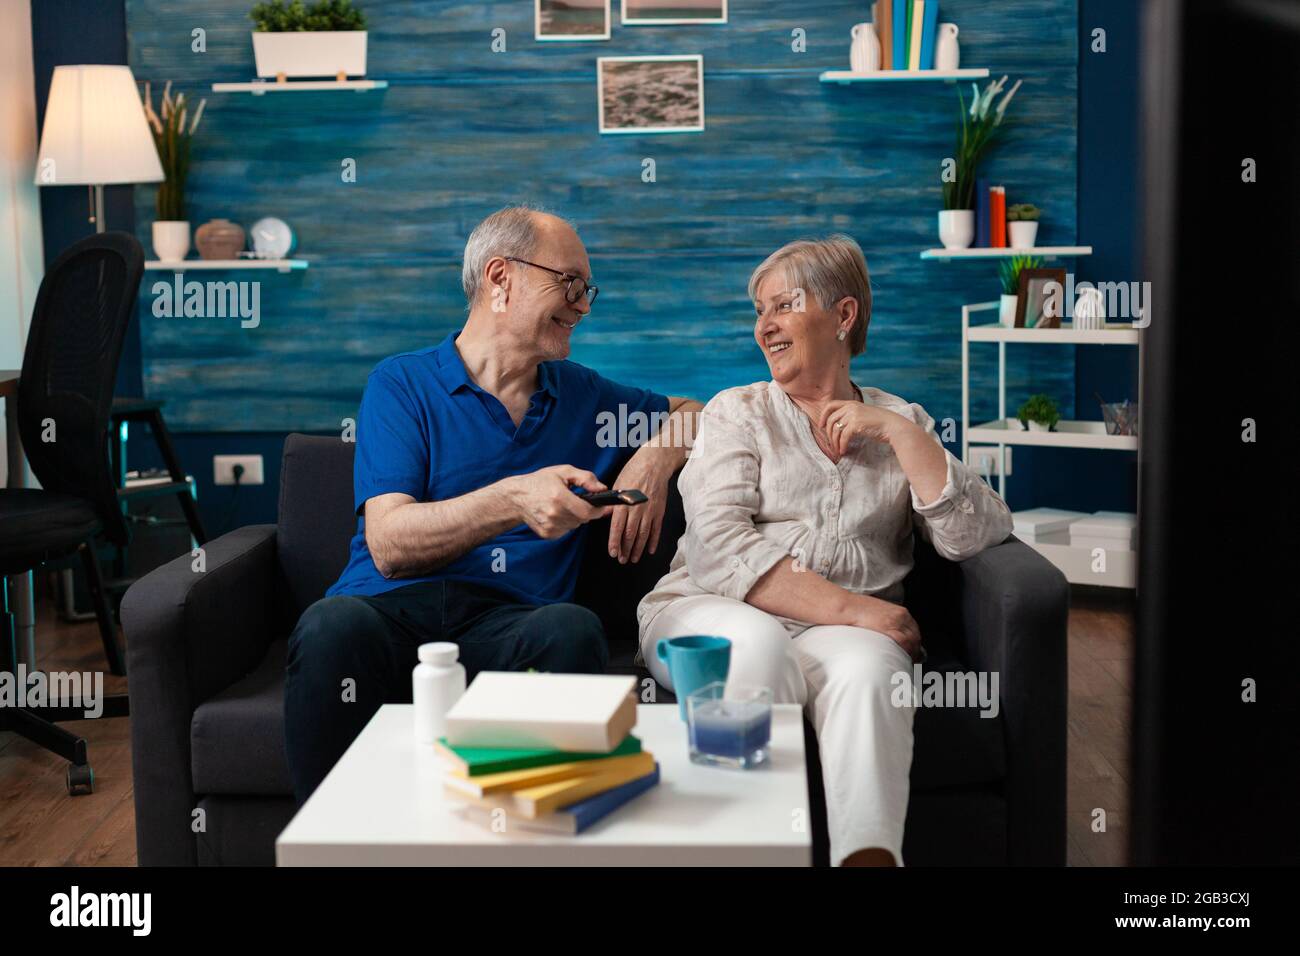 Old couple enjoying retirement at home sitting on sofa watching television. Senior people having fun together with tv movie technology for relaxation entertainment being indoors Stock Photo